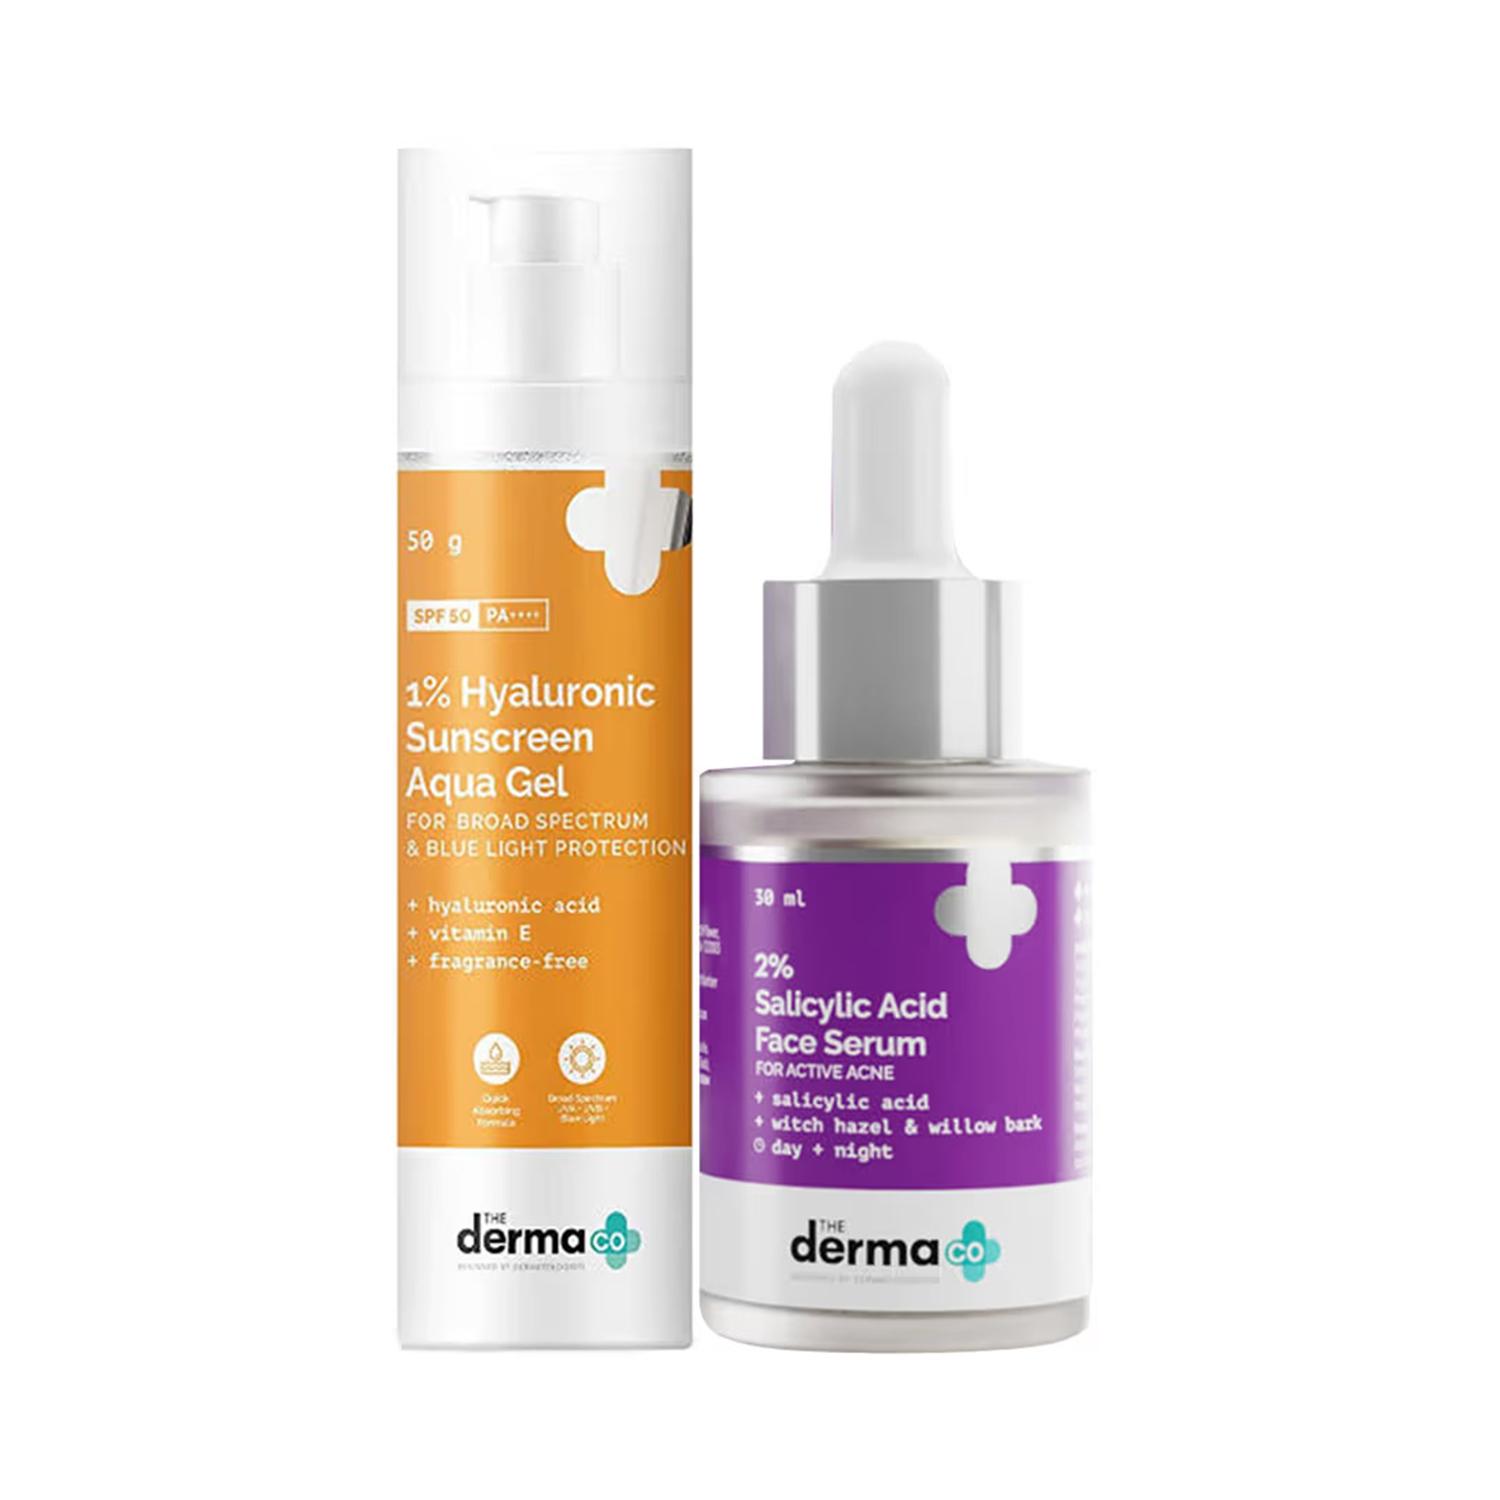 The Derma Co | The Derma Co 1% Hyaluronic Sunscreen and 2% Salicylic Serum Combo